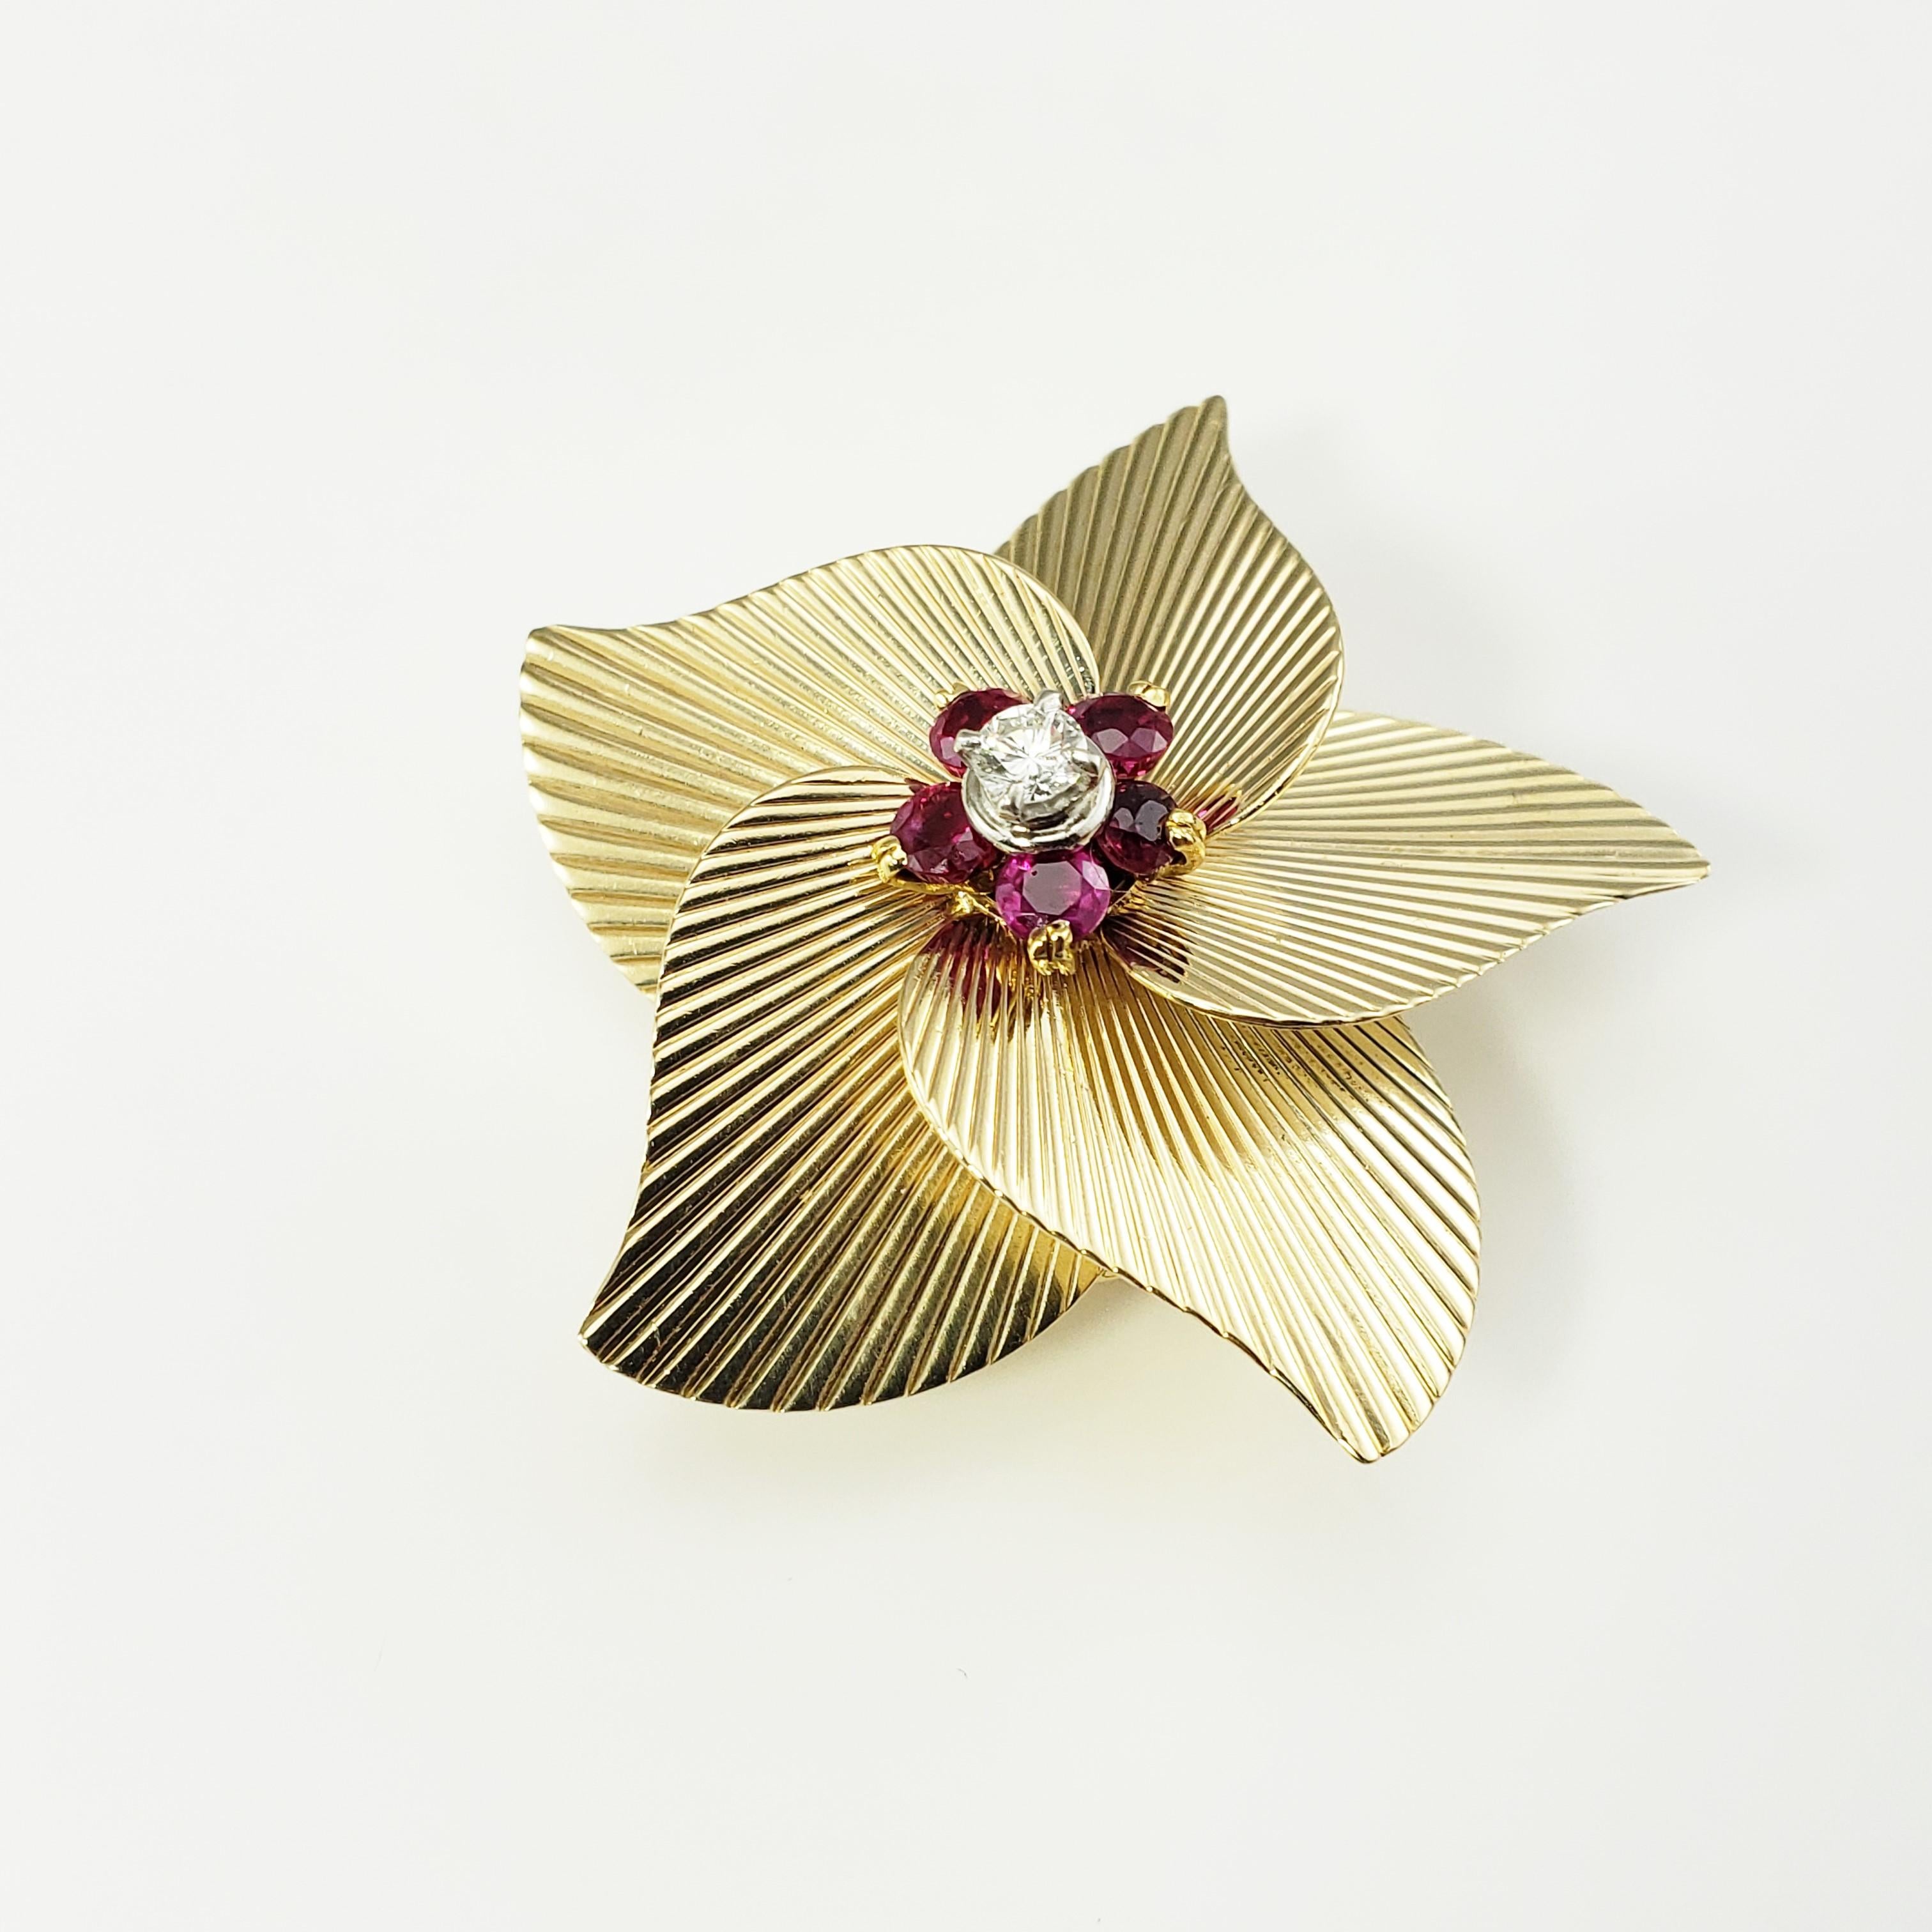 Tiffany & Co. 14 Karat Yellow Gold Ruby and Diamond Brooch/Pin-

This lovely Tiffany flower brooch is accented with one round brilliant cut diamond and five rubies set in beautifully detailed 14K yellow gold.

Total diamond weight:  .15 ct.

Diamond